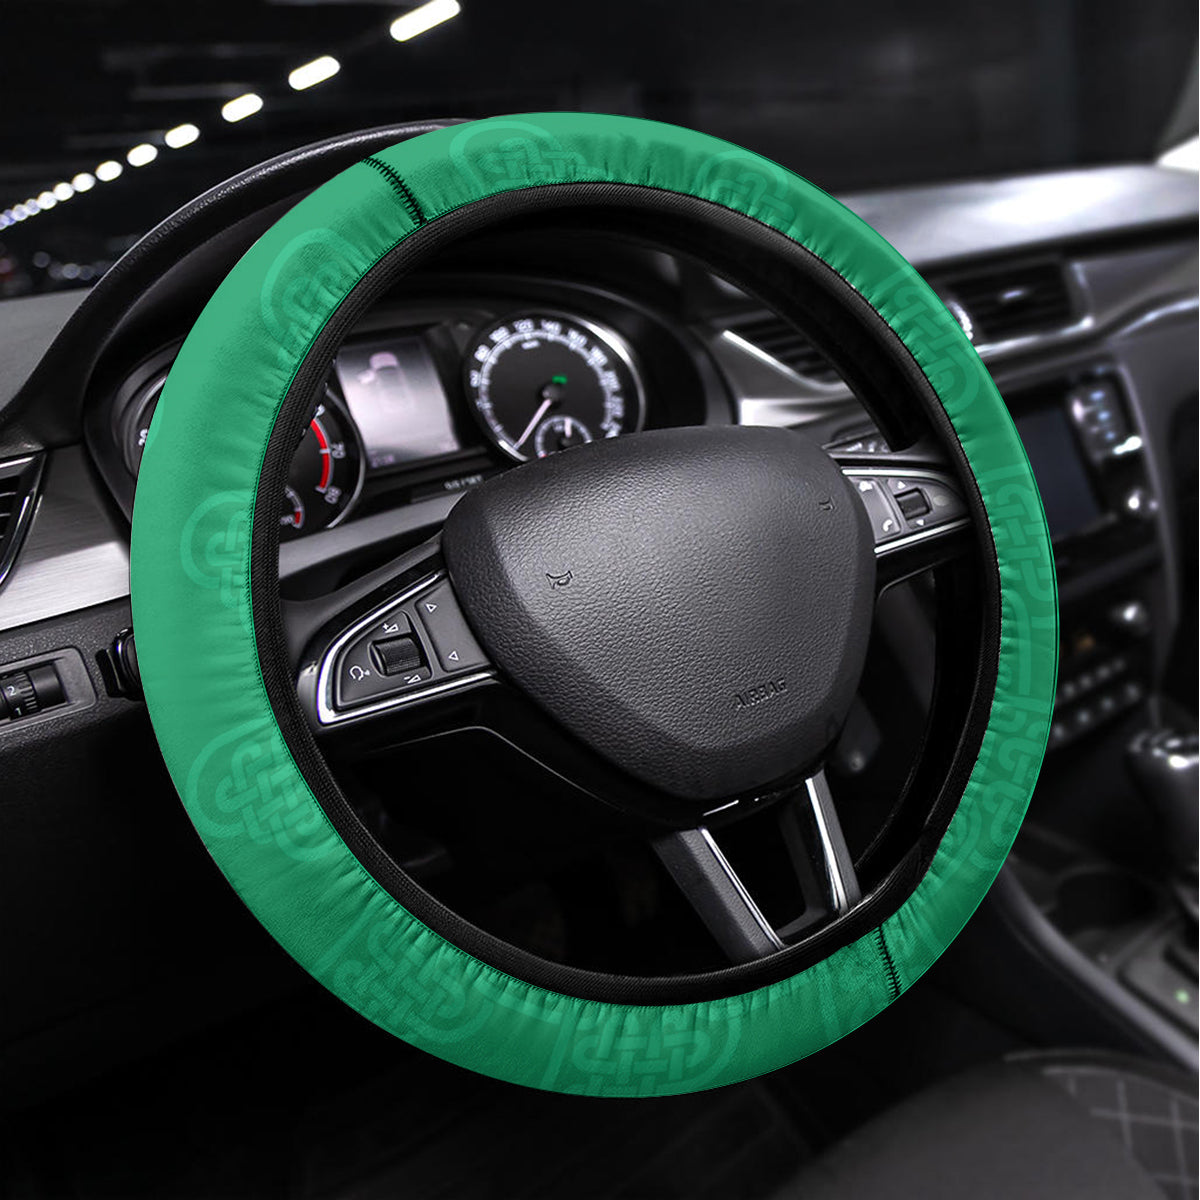 United States And Ireland Steering Wheel Cover USA Eagle With Irish Celtic Cross